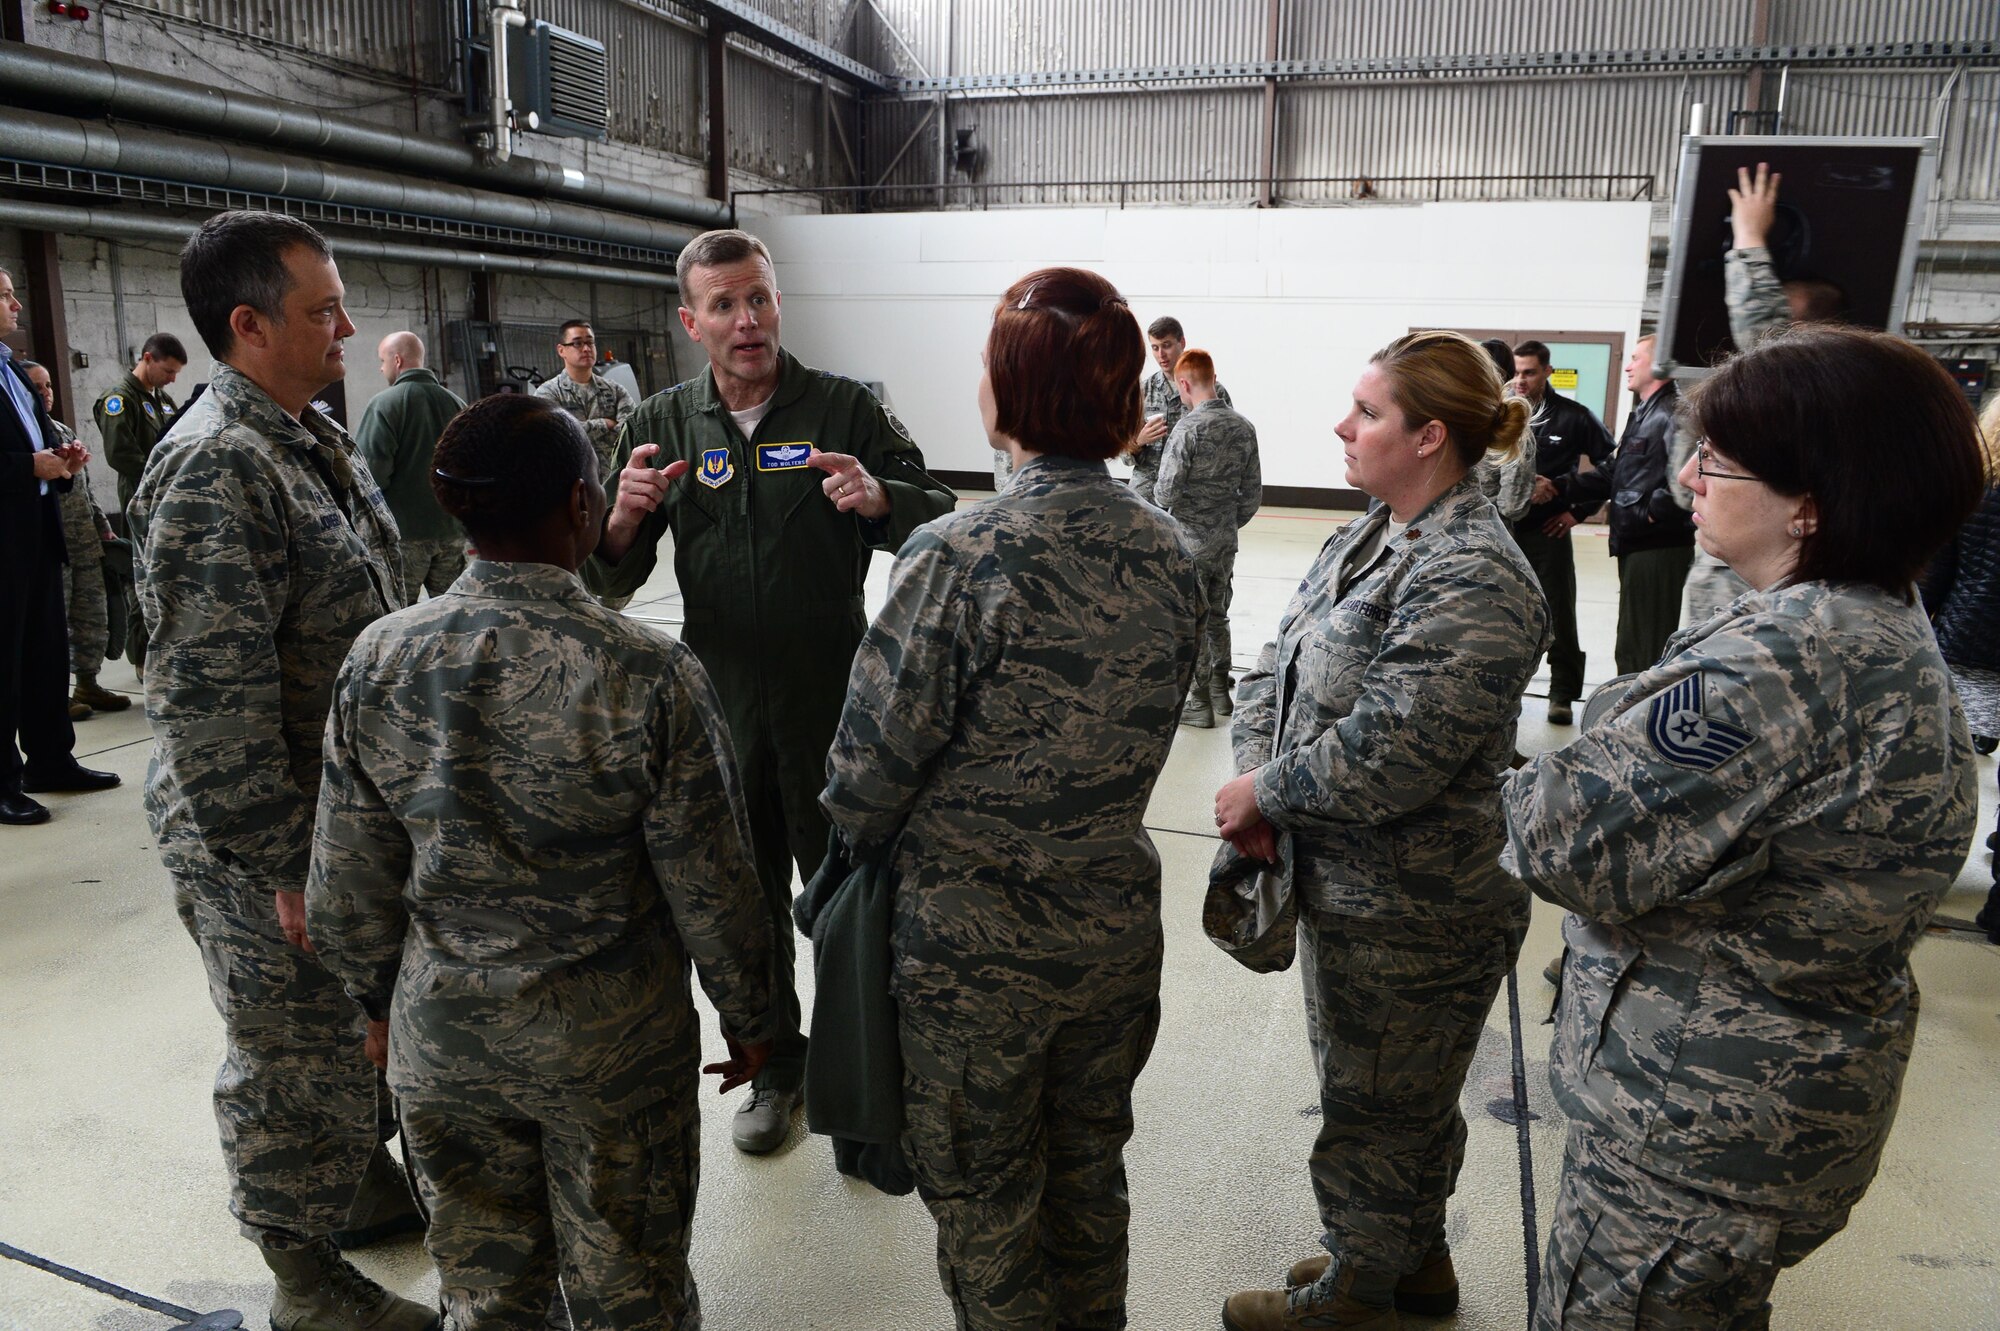 Gen. Tod D. Wolters, U.S. Air Forces in Europe and Air Forces Africa commander, center left, interacts with Airmen after an allcall at Spangdahlem Air Base, Germany, Oct. 6, 2016. Wolters made his first visit to Spangdahlem since assuming command in August 2016, speaking to Airmen on the importance and uniqueness of their mission priorities. (U.S. Air Force photo by Senior Airman Joshua R. M. Dewberry)